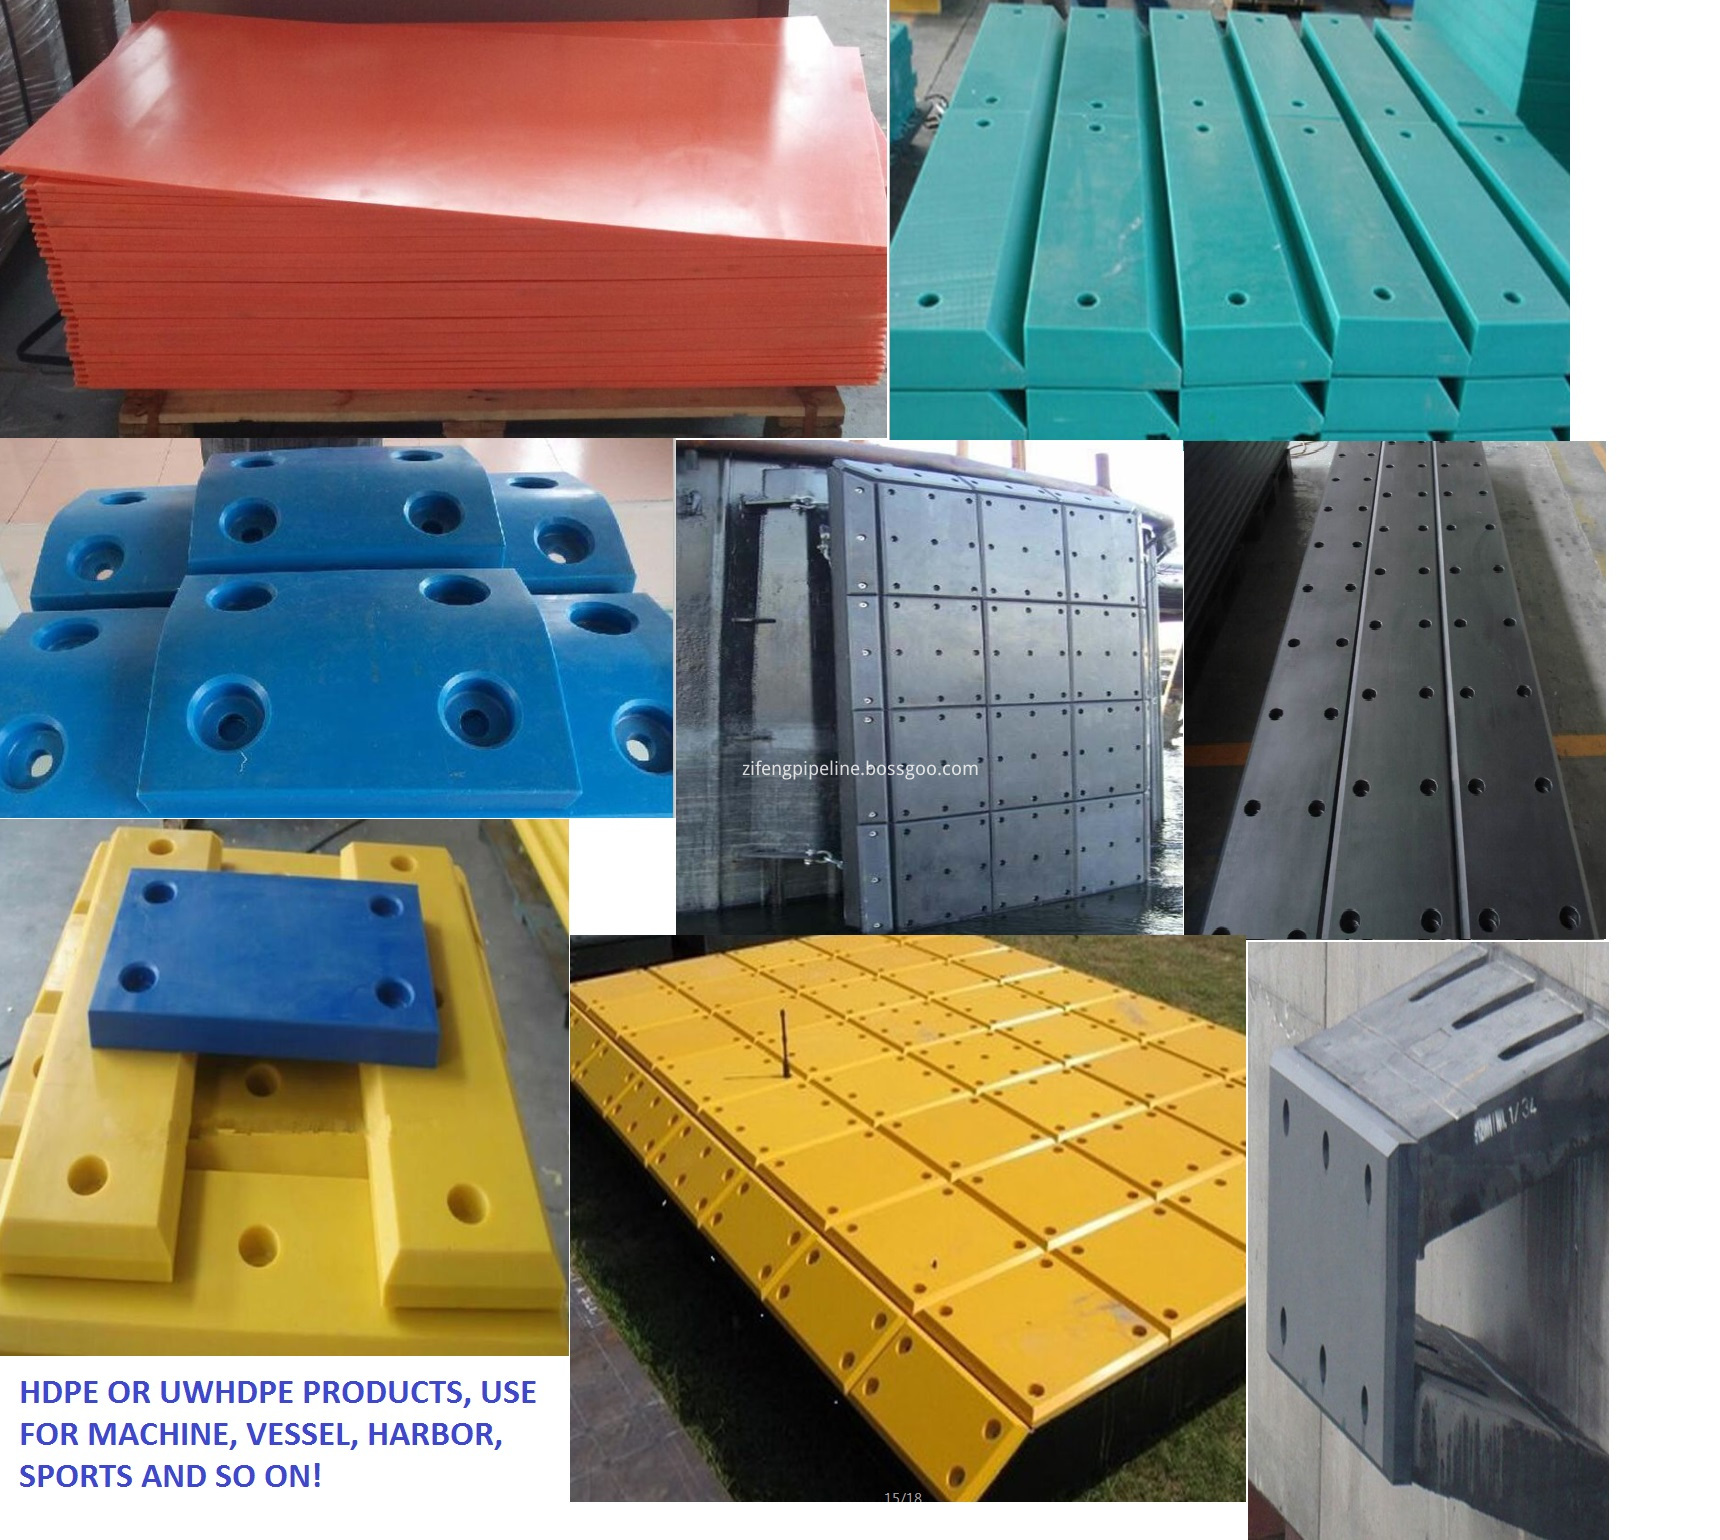 Other Hdpe Products